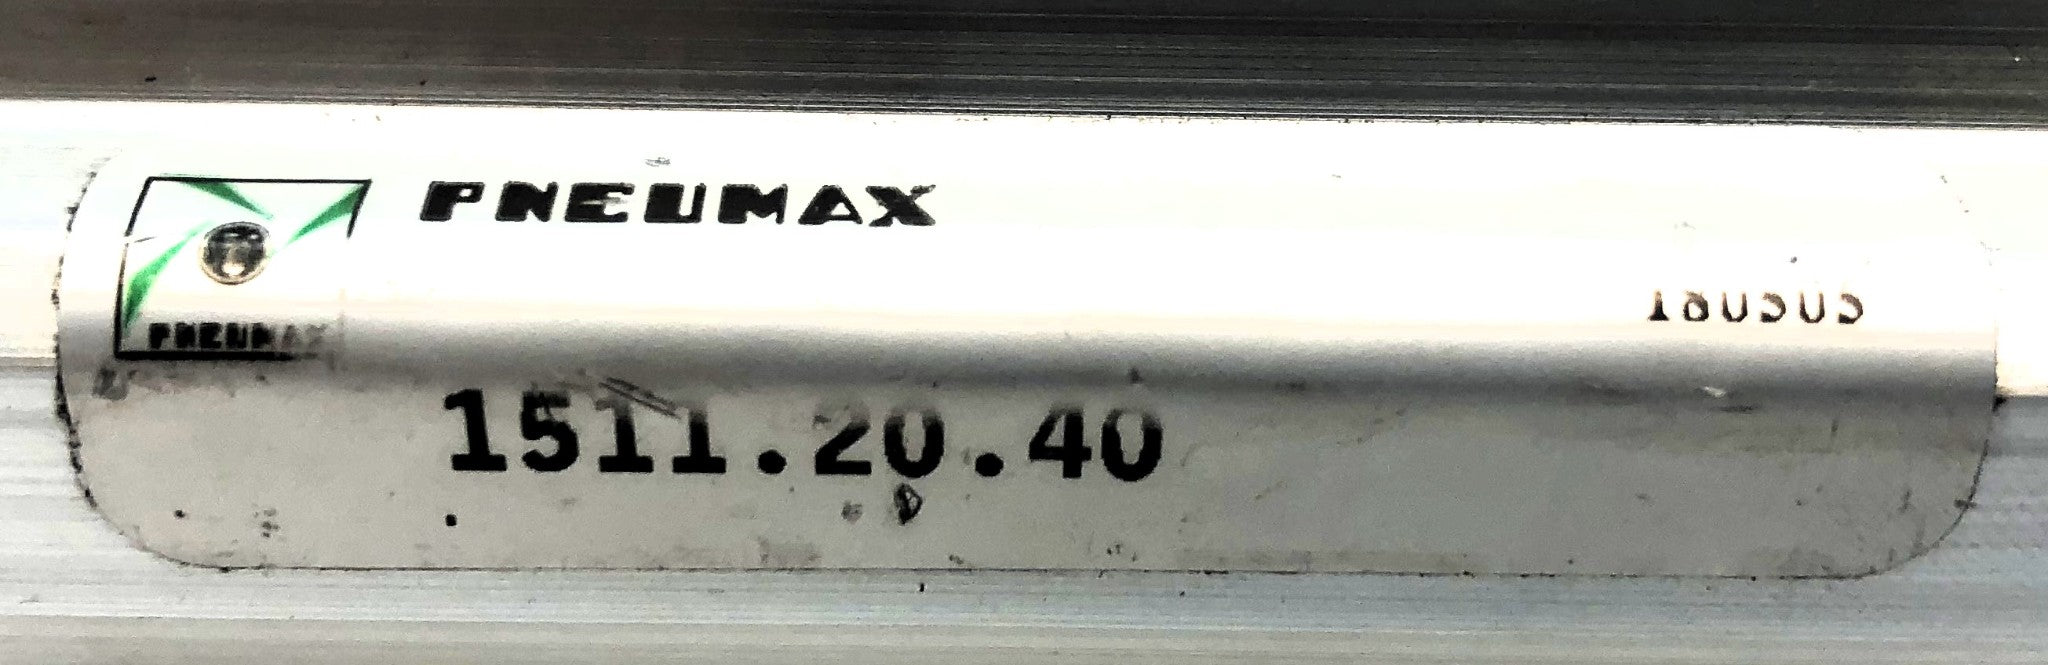 Pneumax Double Acting Compact Cylinder 1511.20.40 NOS